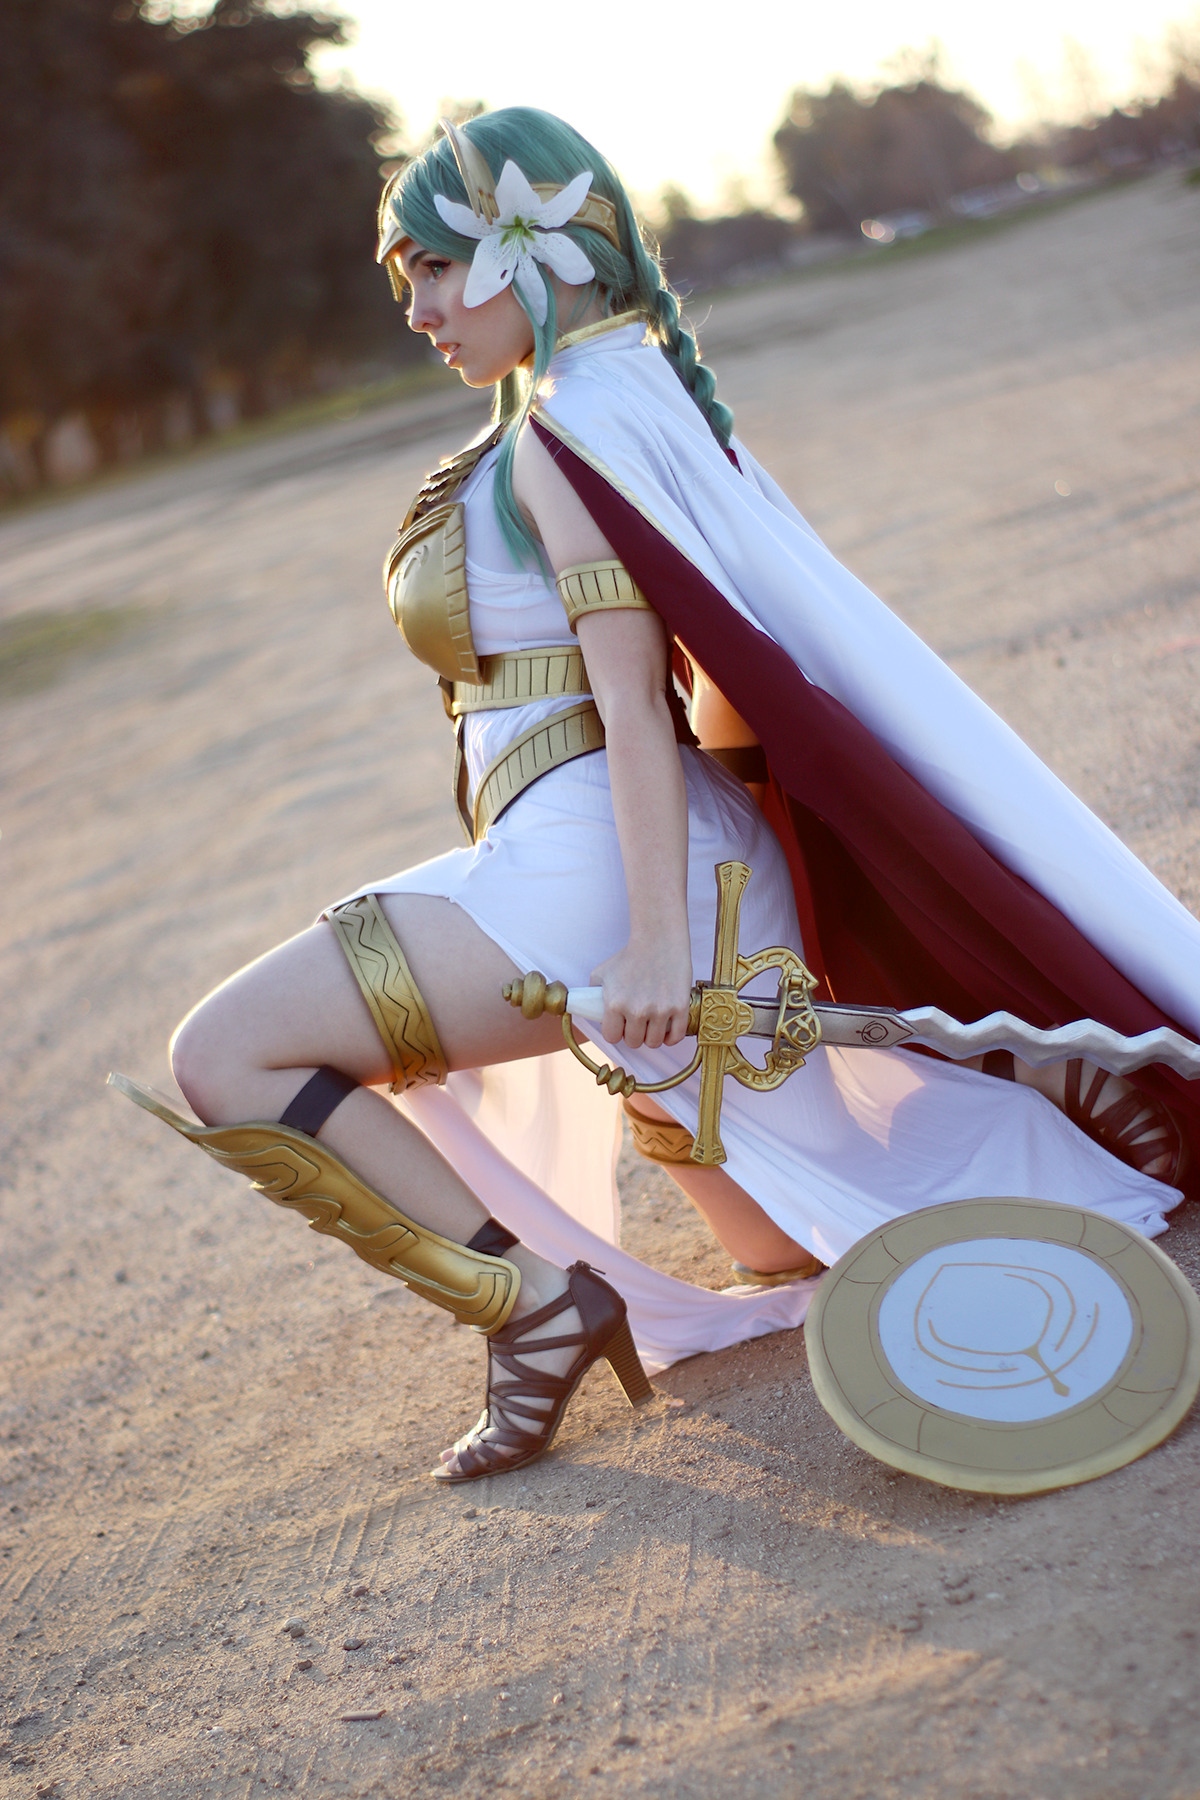 saint seiros i’m going to be at katsucon in a couple weeks btw! and bringing a new fire emblem cosplay (from an old game)